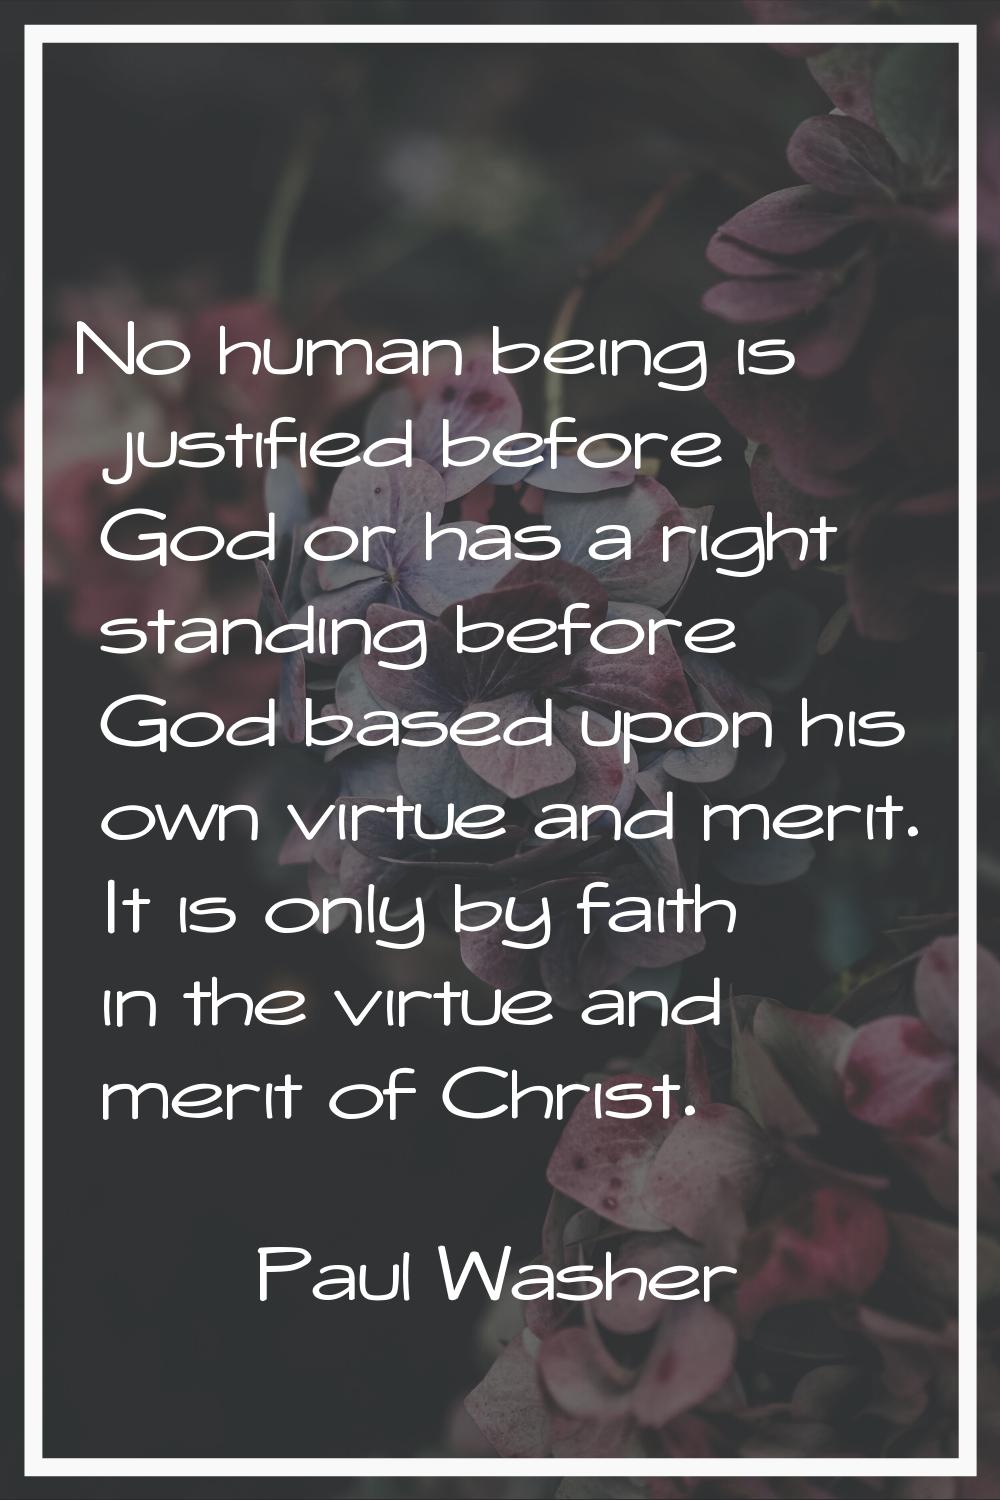 No human being is justified before God or has a right standing before God based upon his own virtue